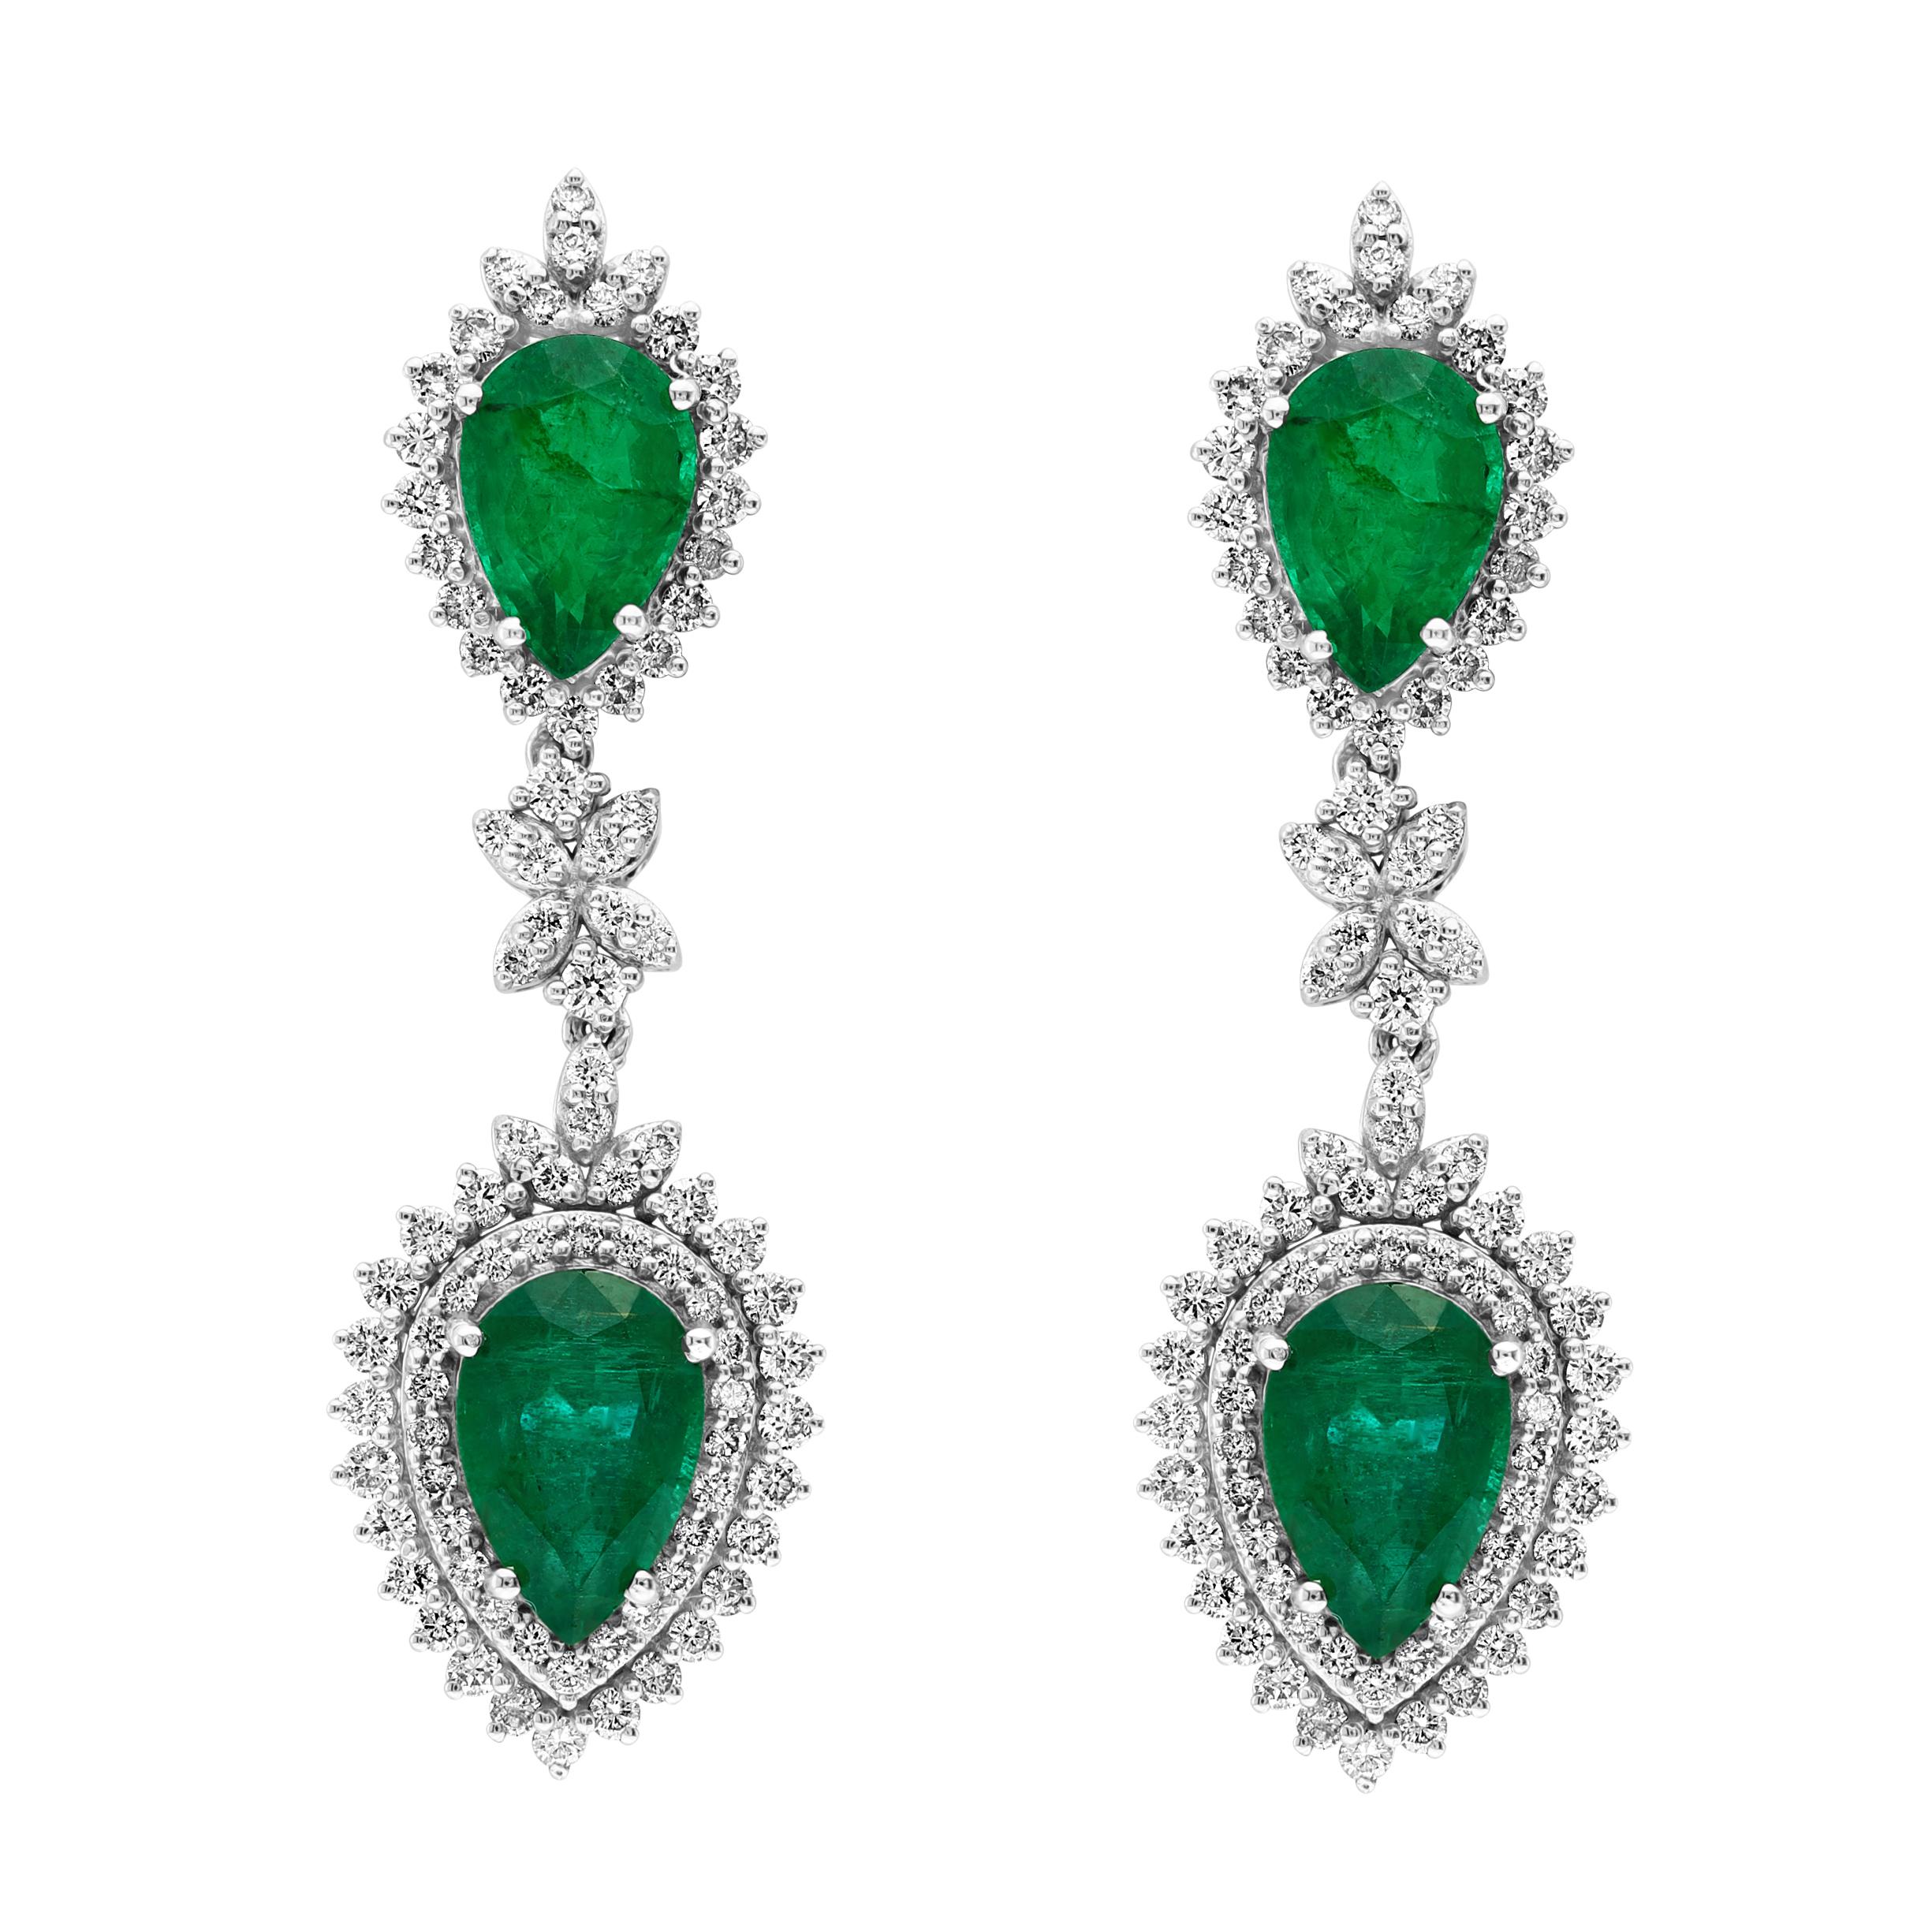 This 73 Ct Zambian Emerald and 22 Ct Diamond Necklace and Earring Bridal Suite is a true masterpiece that showcases the exceptional quality and beauty of Zambian Emeralds and diamonds. The emeralds on this set are all from Zambia and range in size